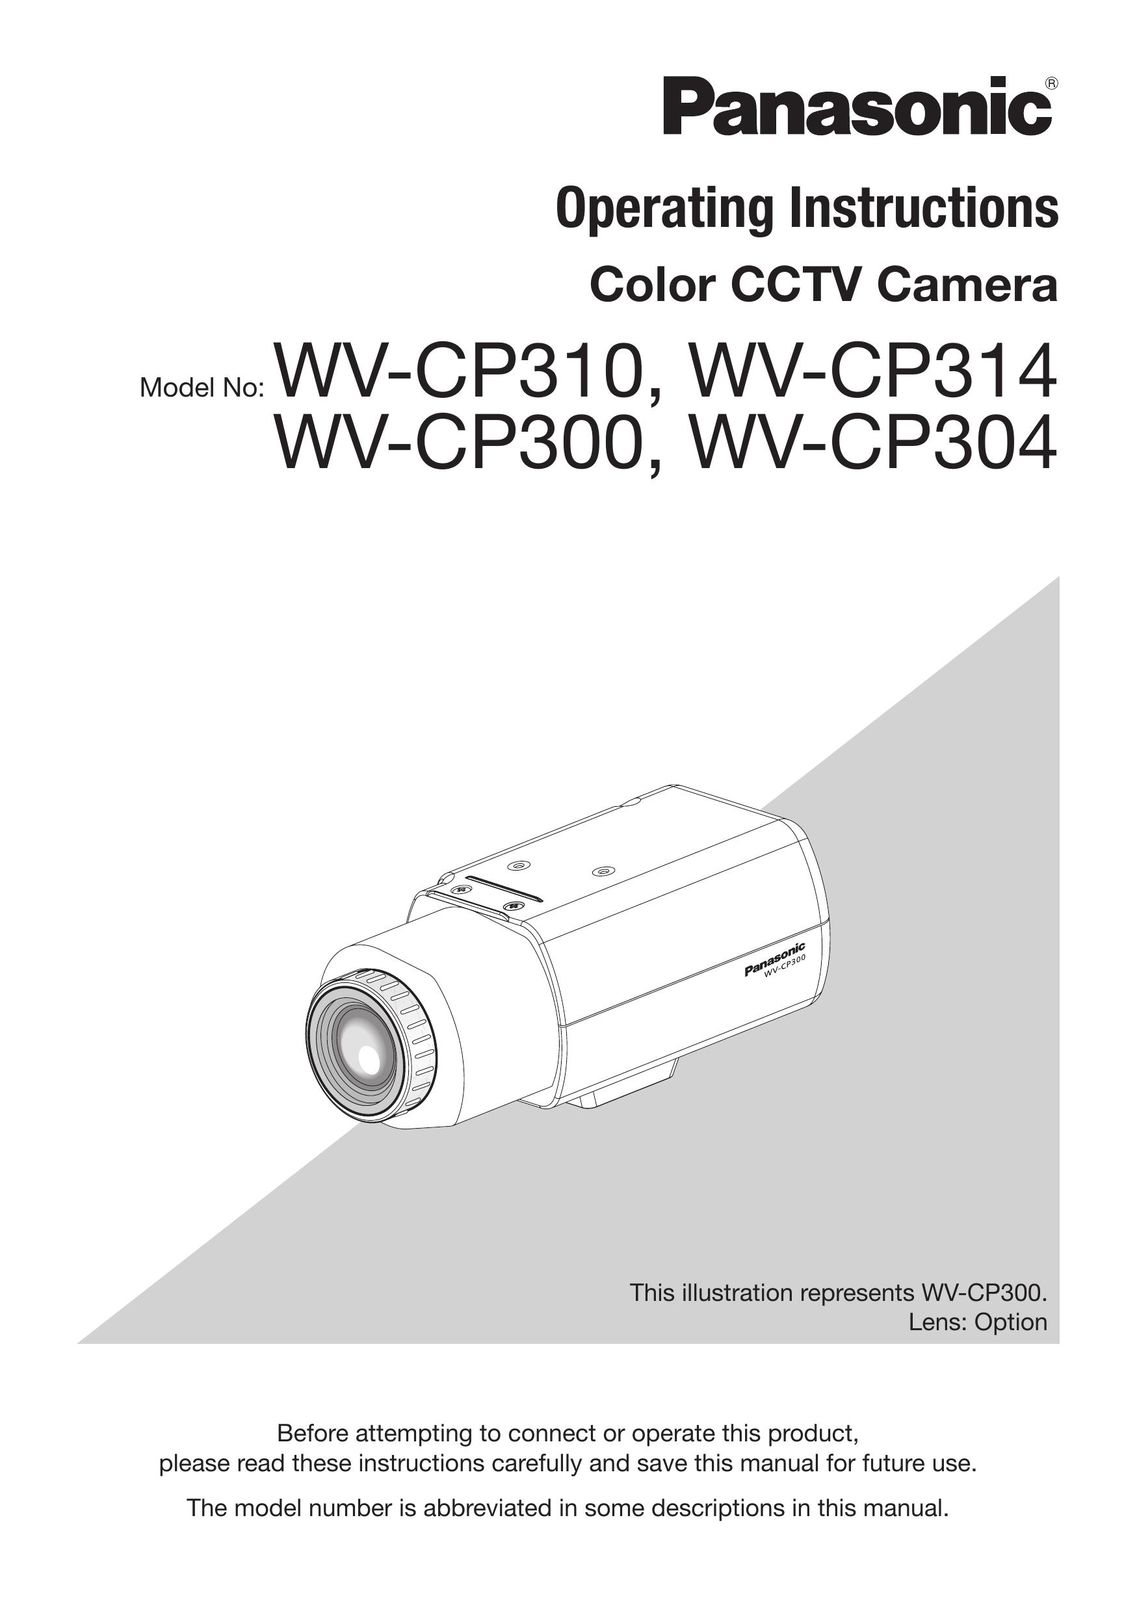 Panasonic WV-CP314 Home Security System User Manual